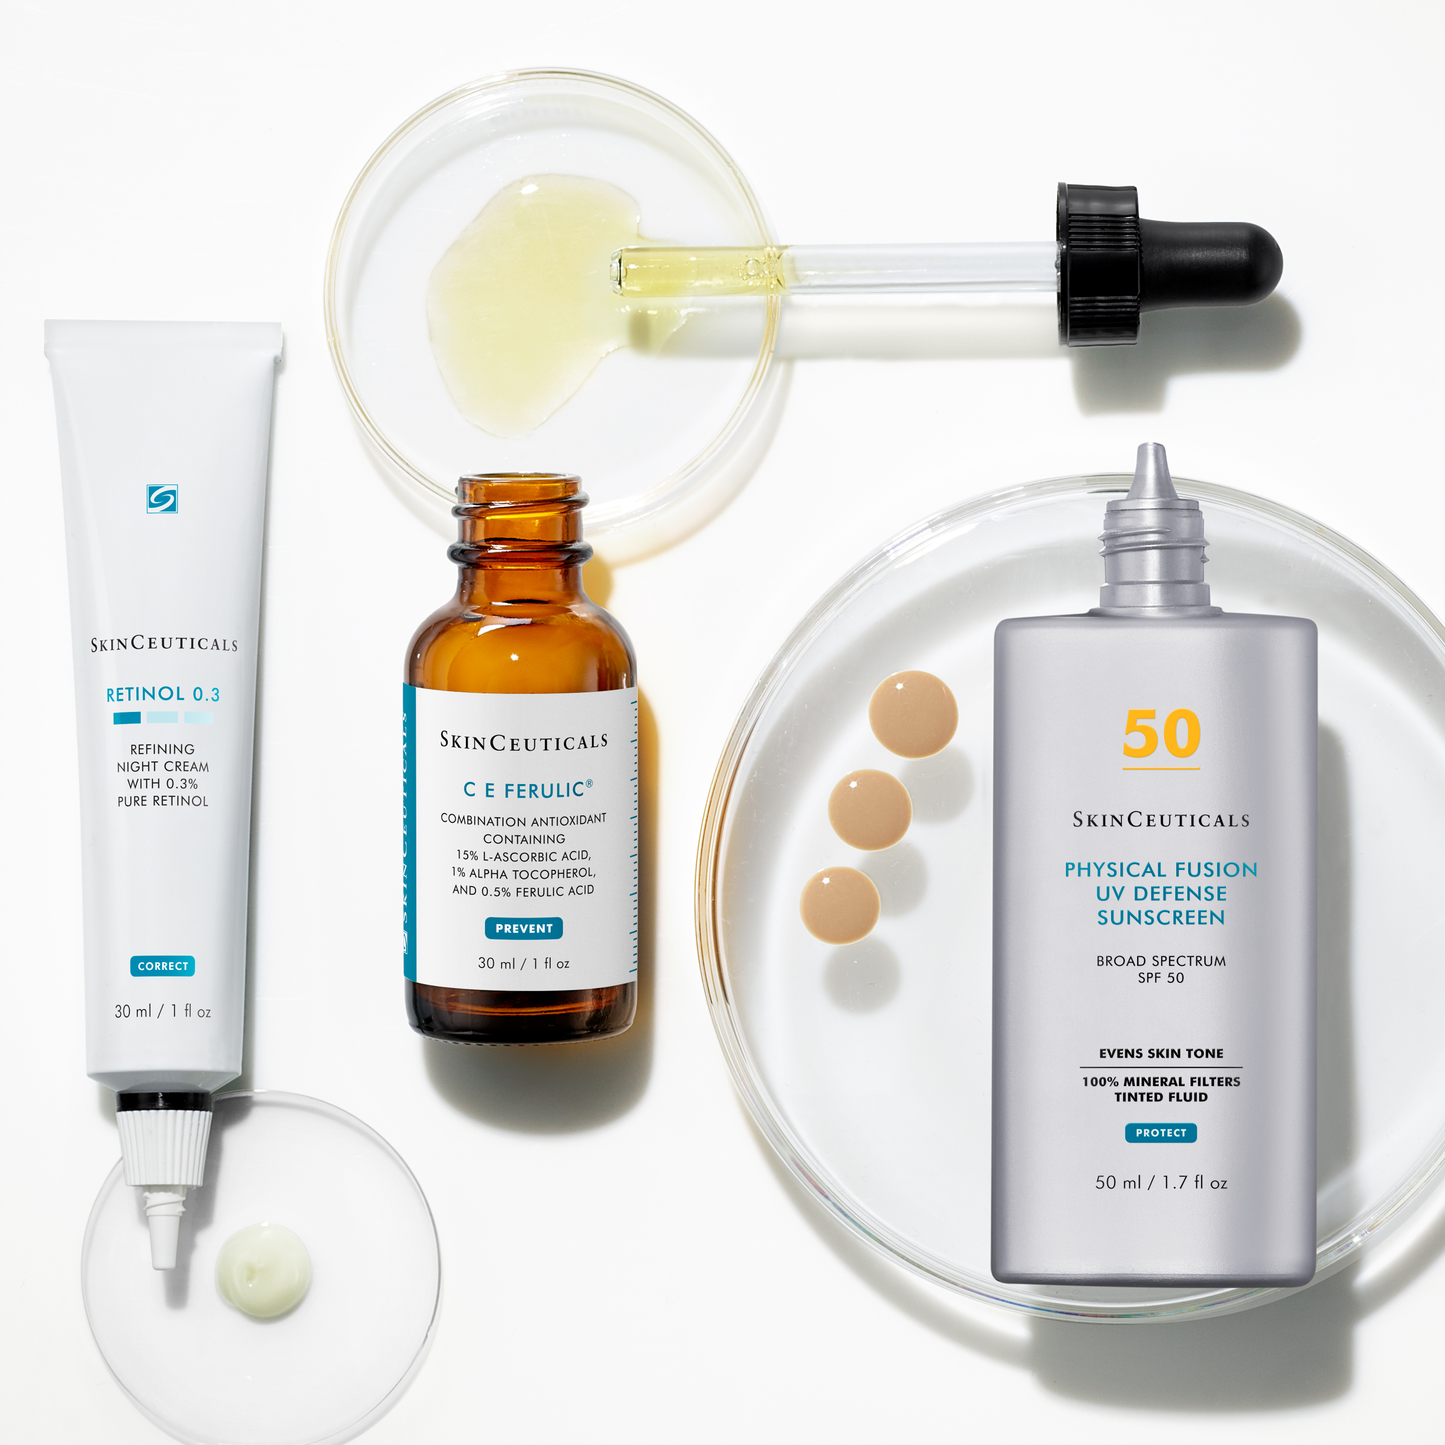 SkinCeuticals: Physical Fusion SPF 50 - 50 ml